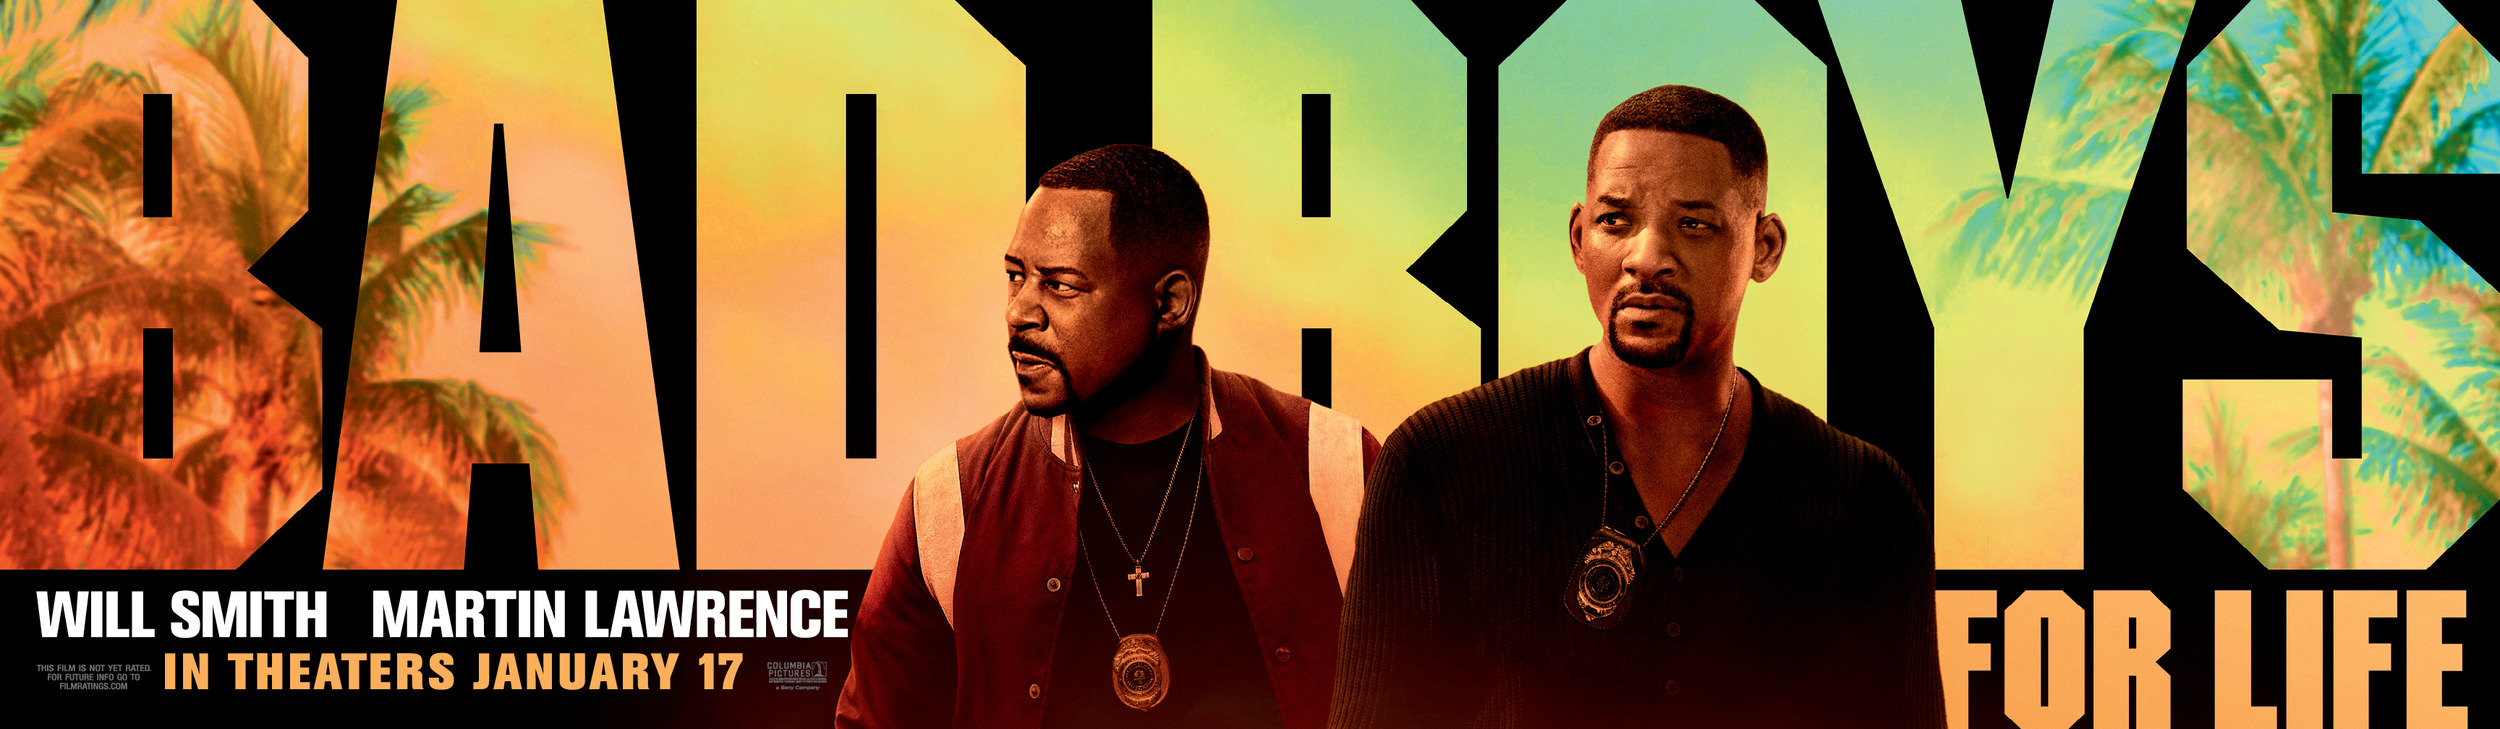 Mega Sized Movie Poster Image for Bad Boys for Life (#4 of 4)